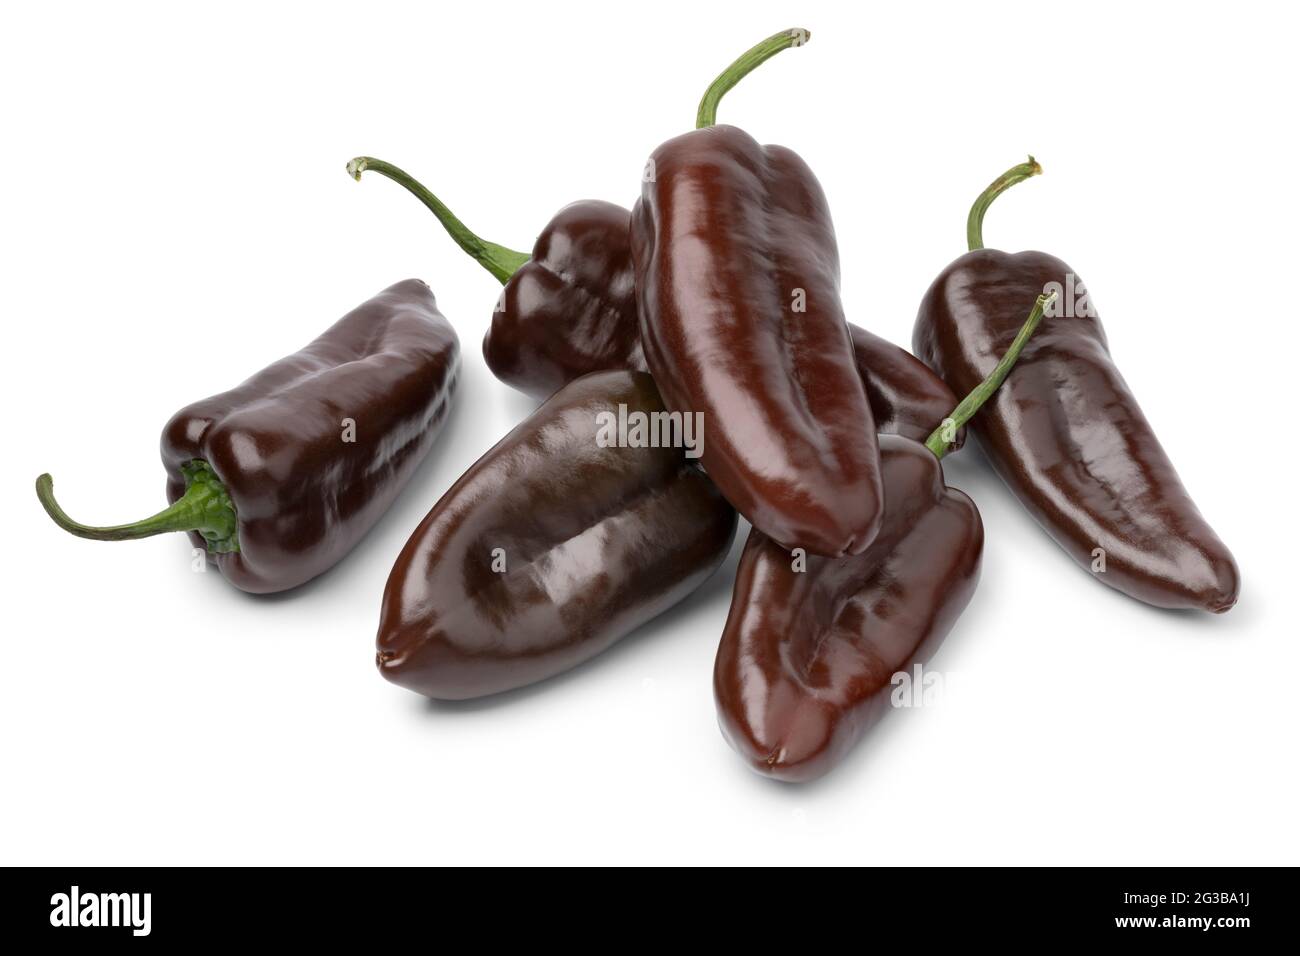 Heap of whole fresh chocolate mini pointed bell peppers close up isolated on white background background Stock Photo